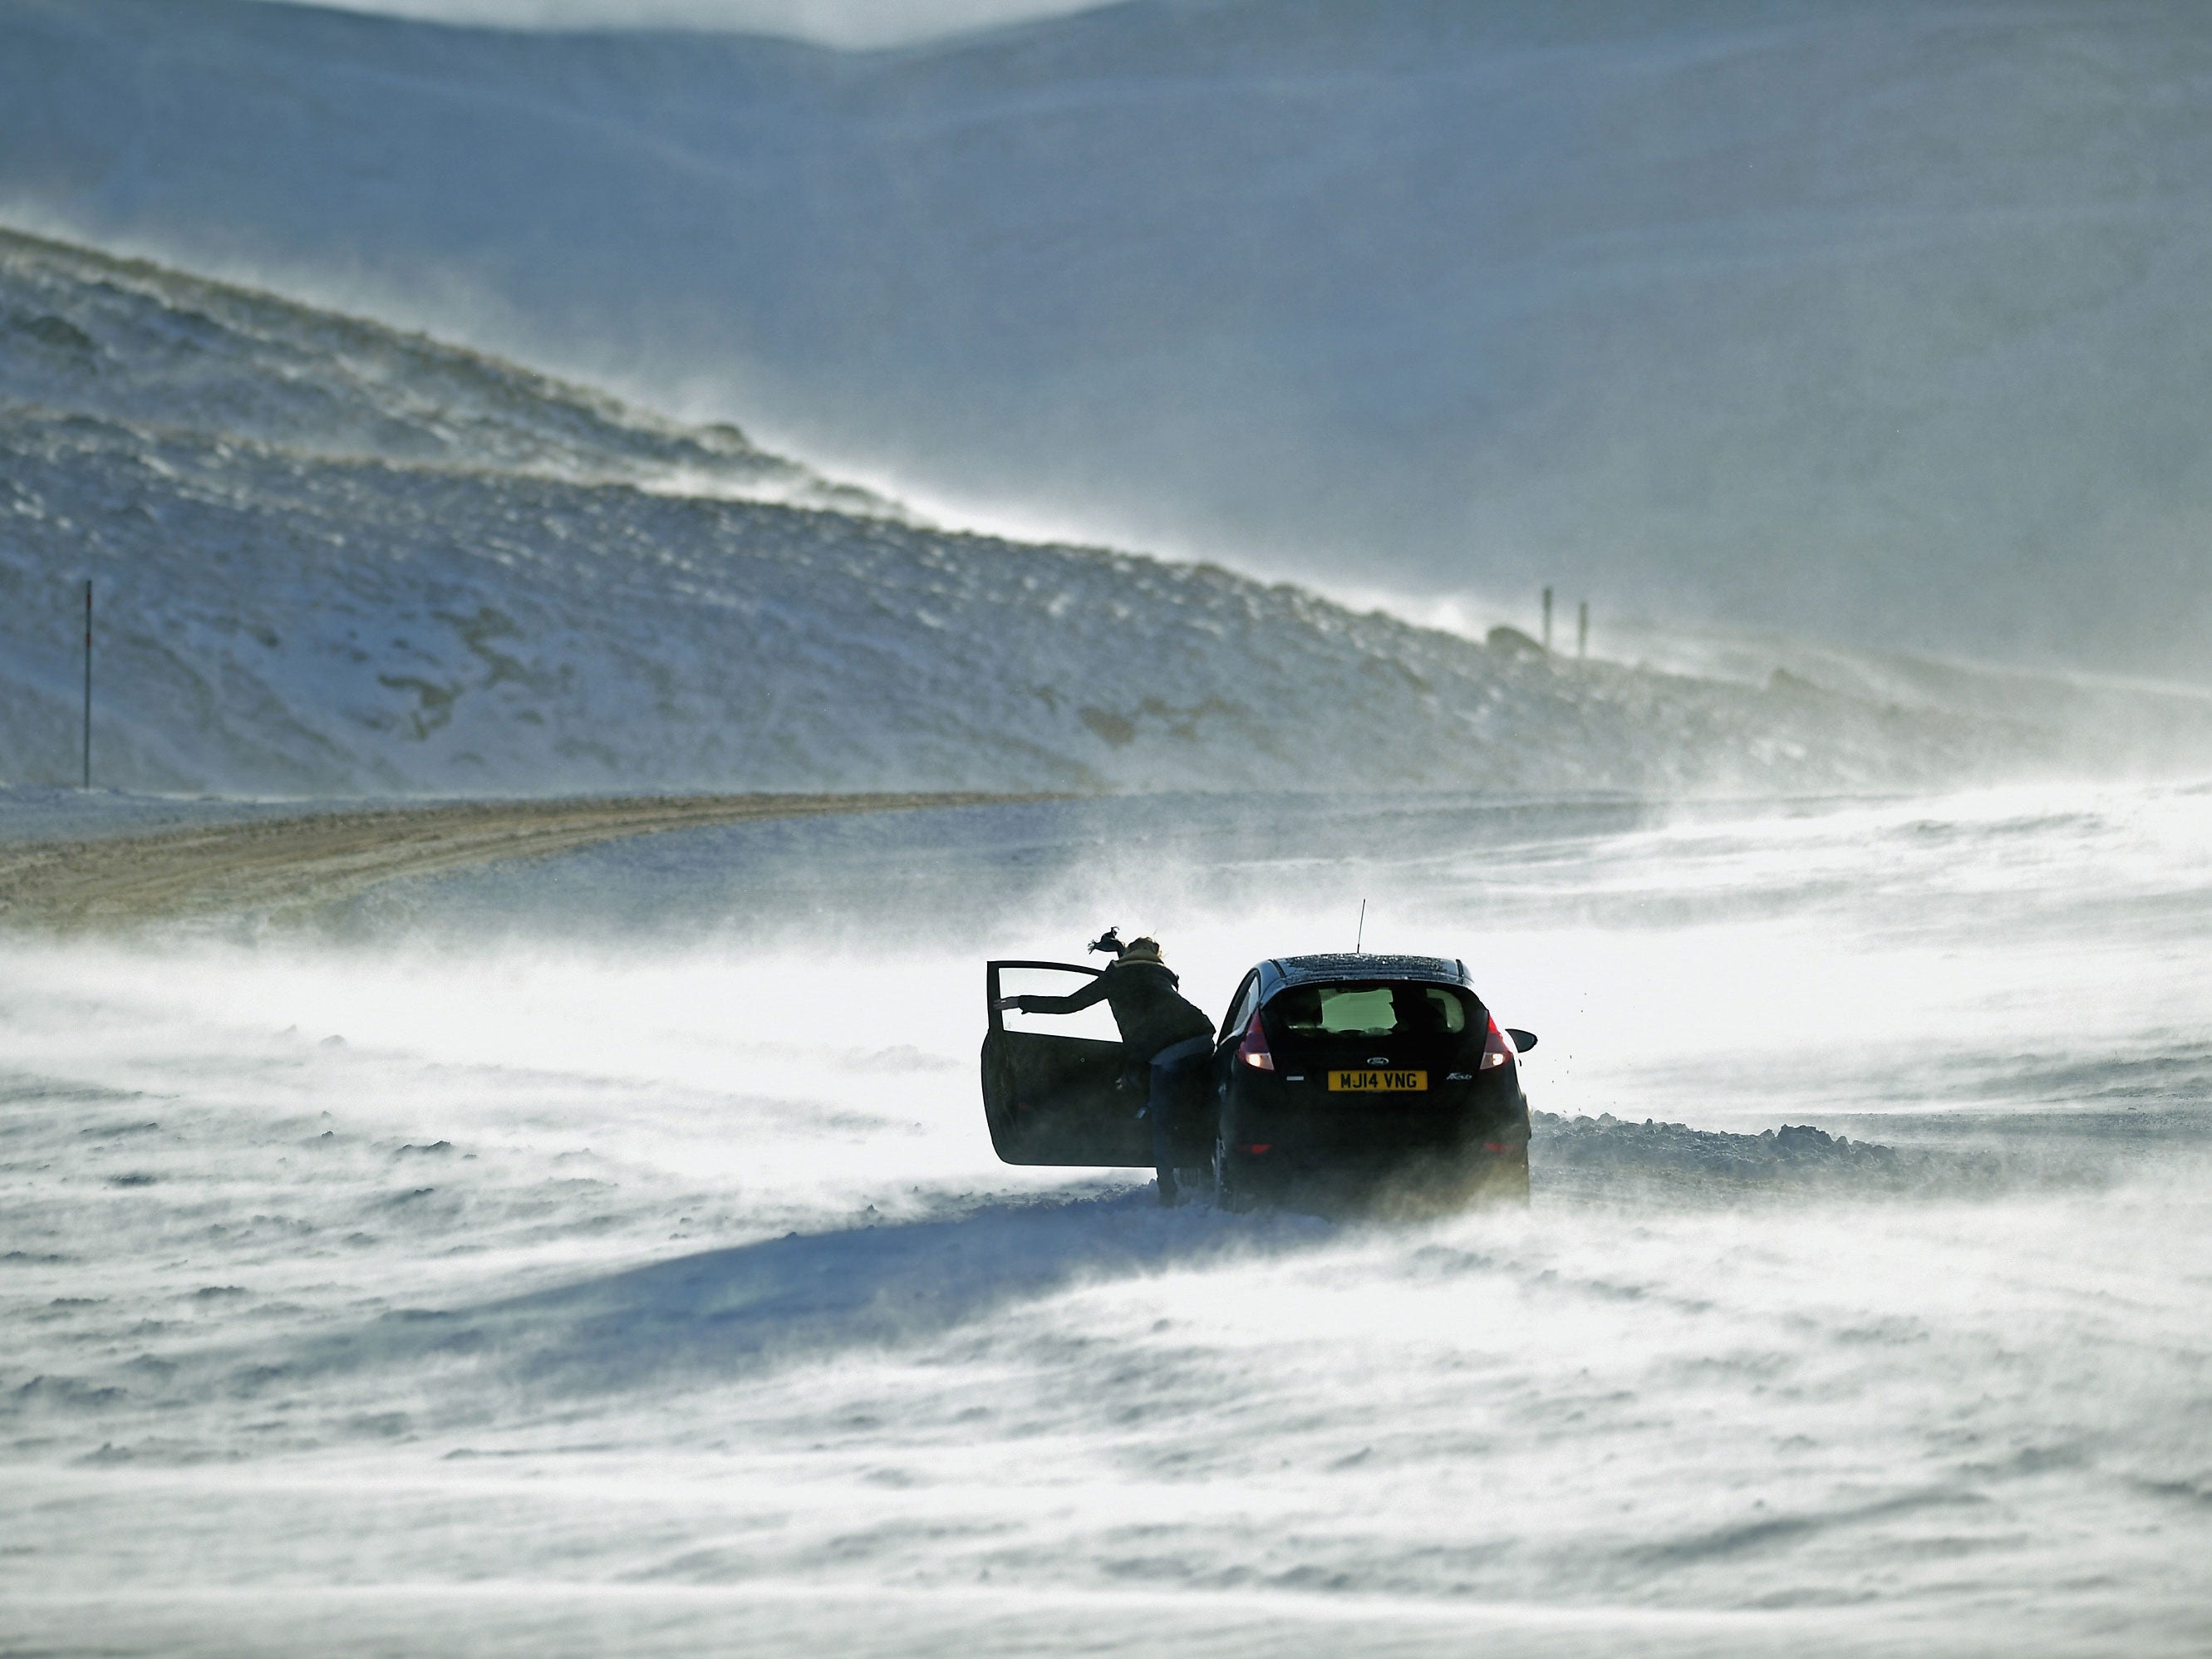 People struggled to push their car in freezing temperatures in the Scottish Highlands in December 2014.